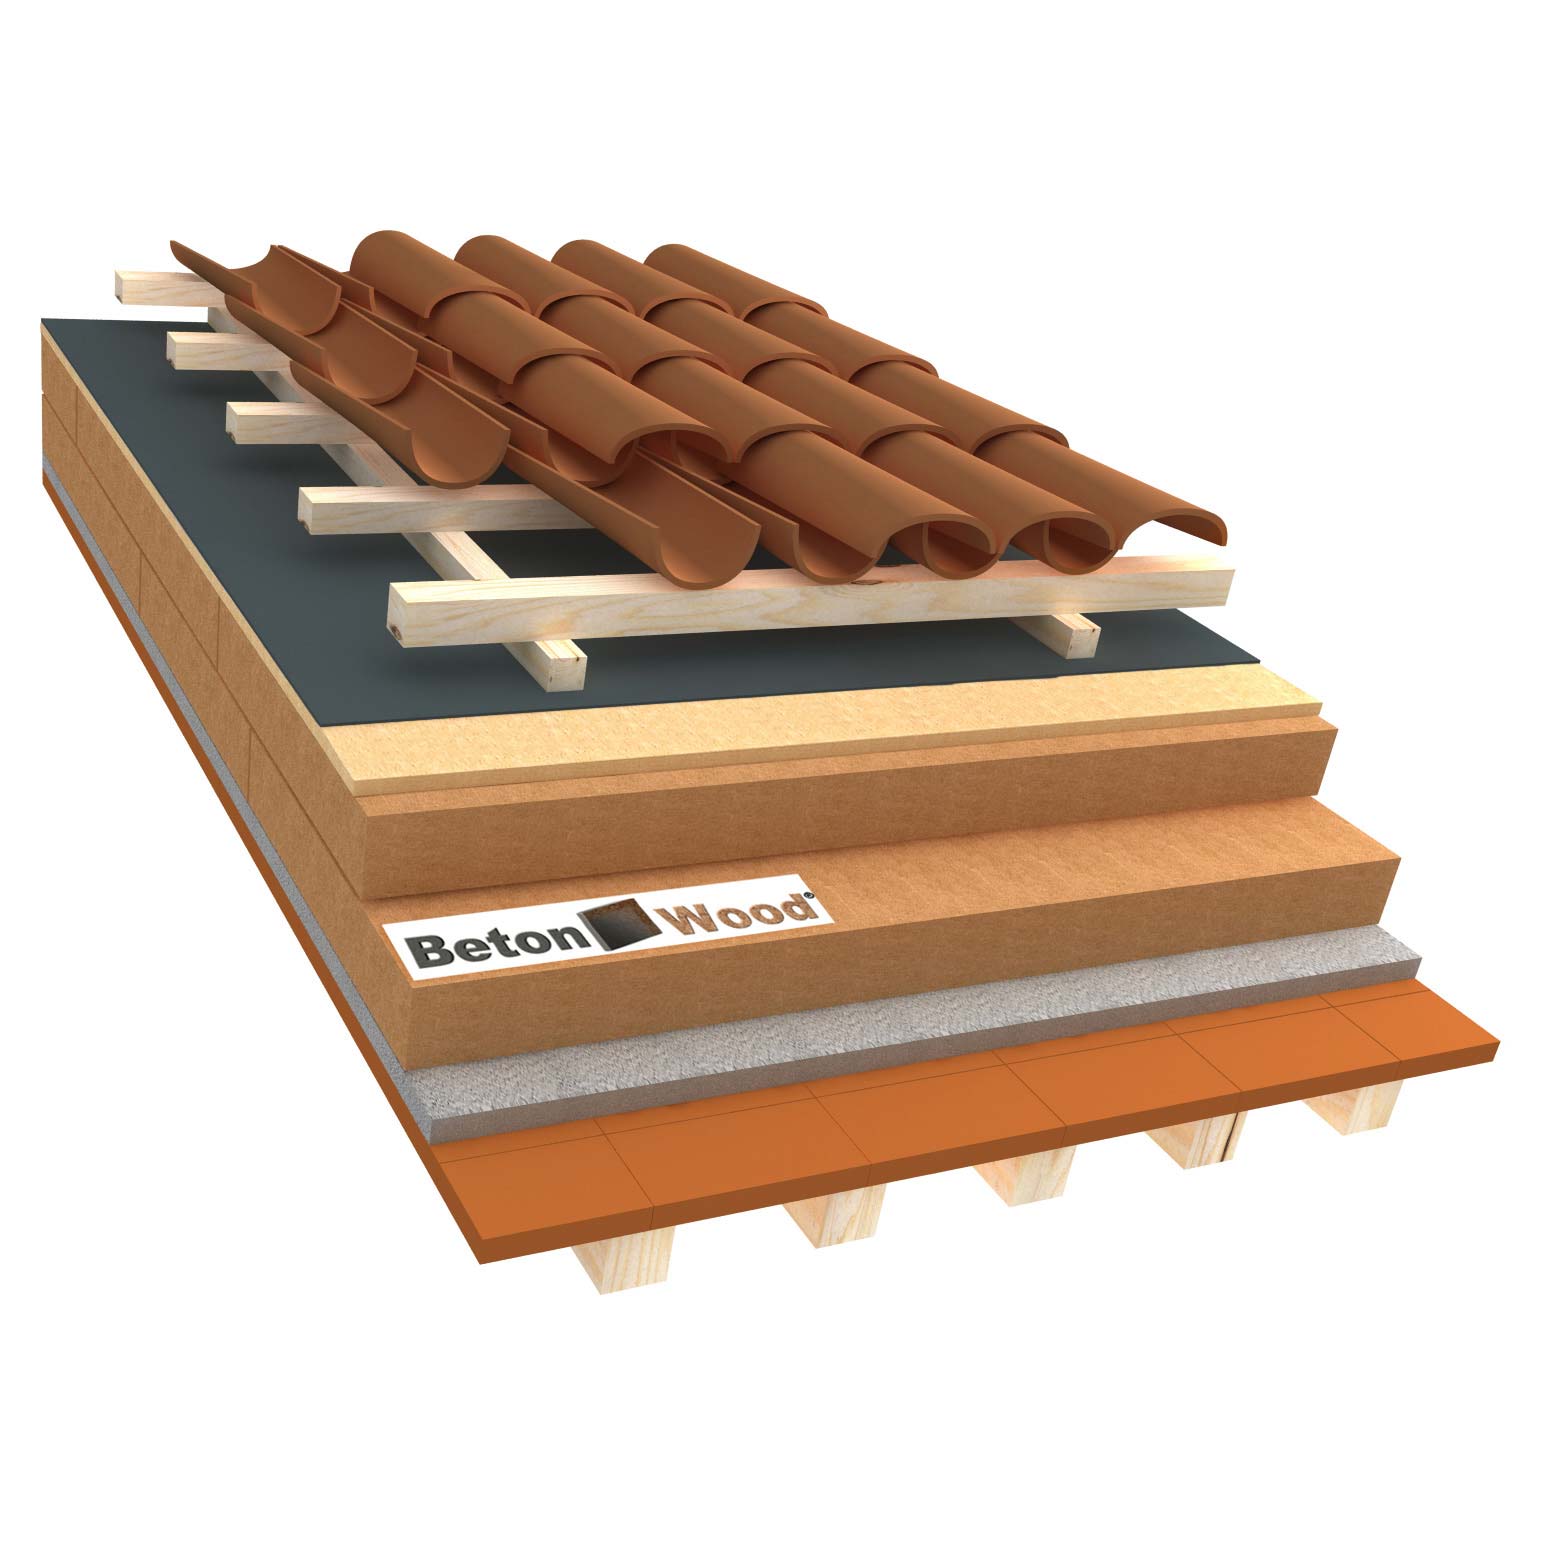 Ventilated roof with wood fiber Isorel and Therm on terracotta tiles